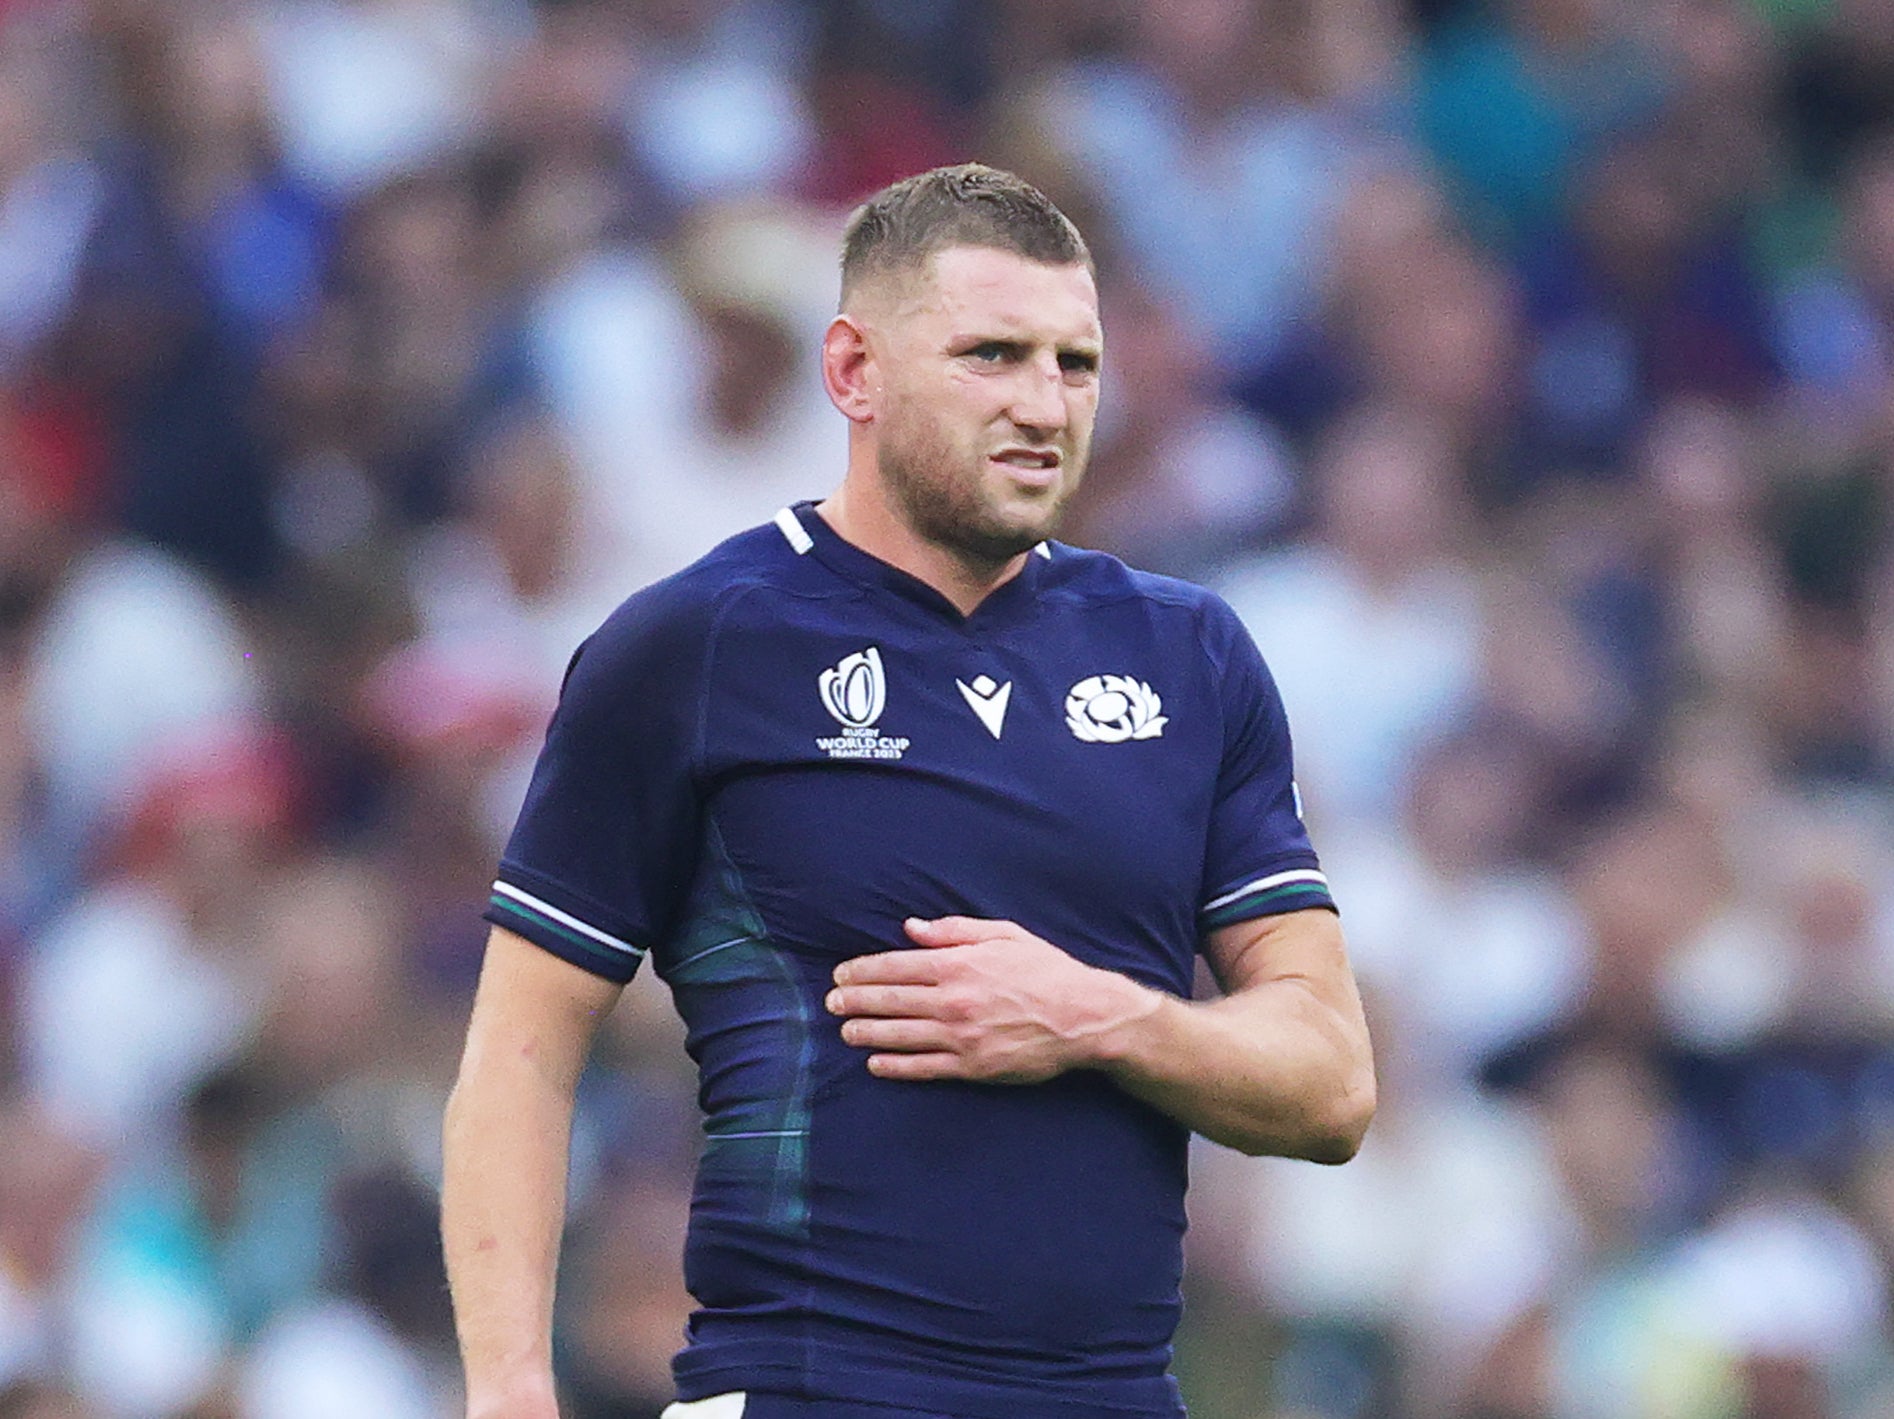 Finn Russell of Scotland clutches his ribs having appeared to have suffered an injury